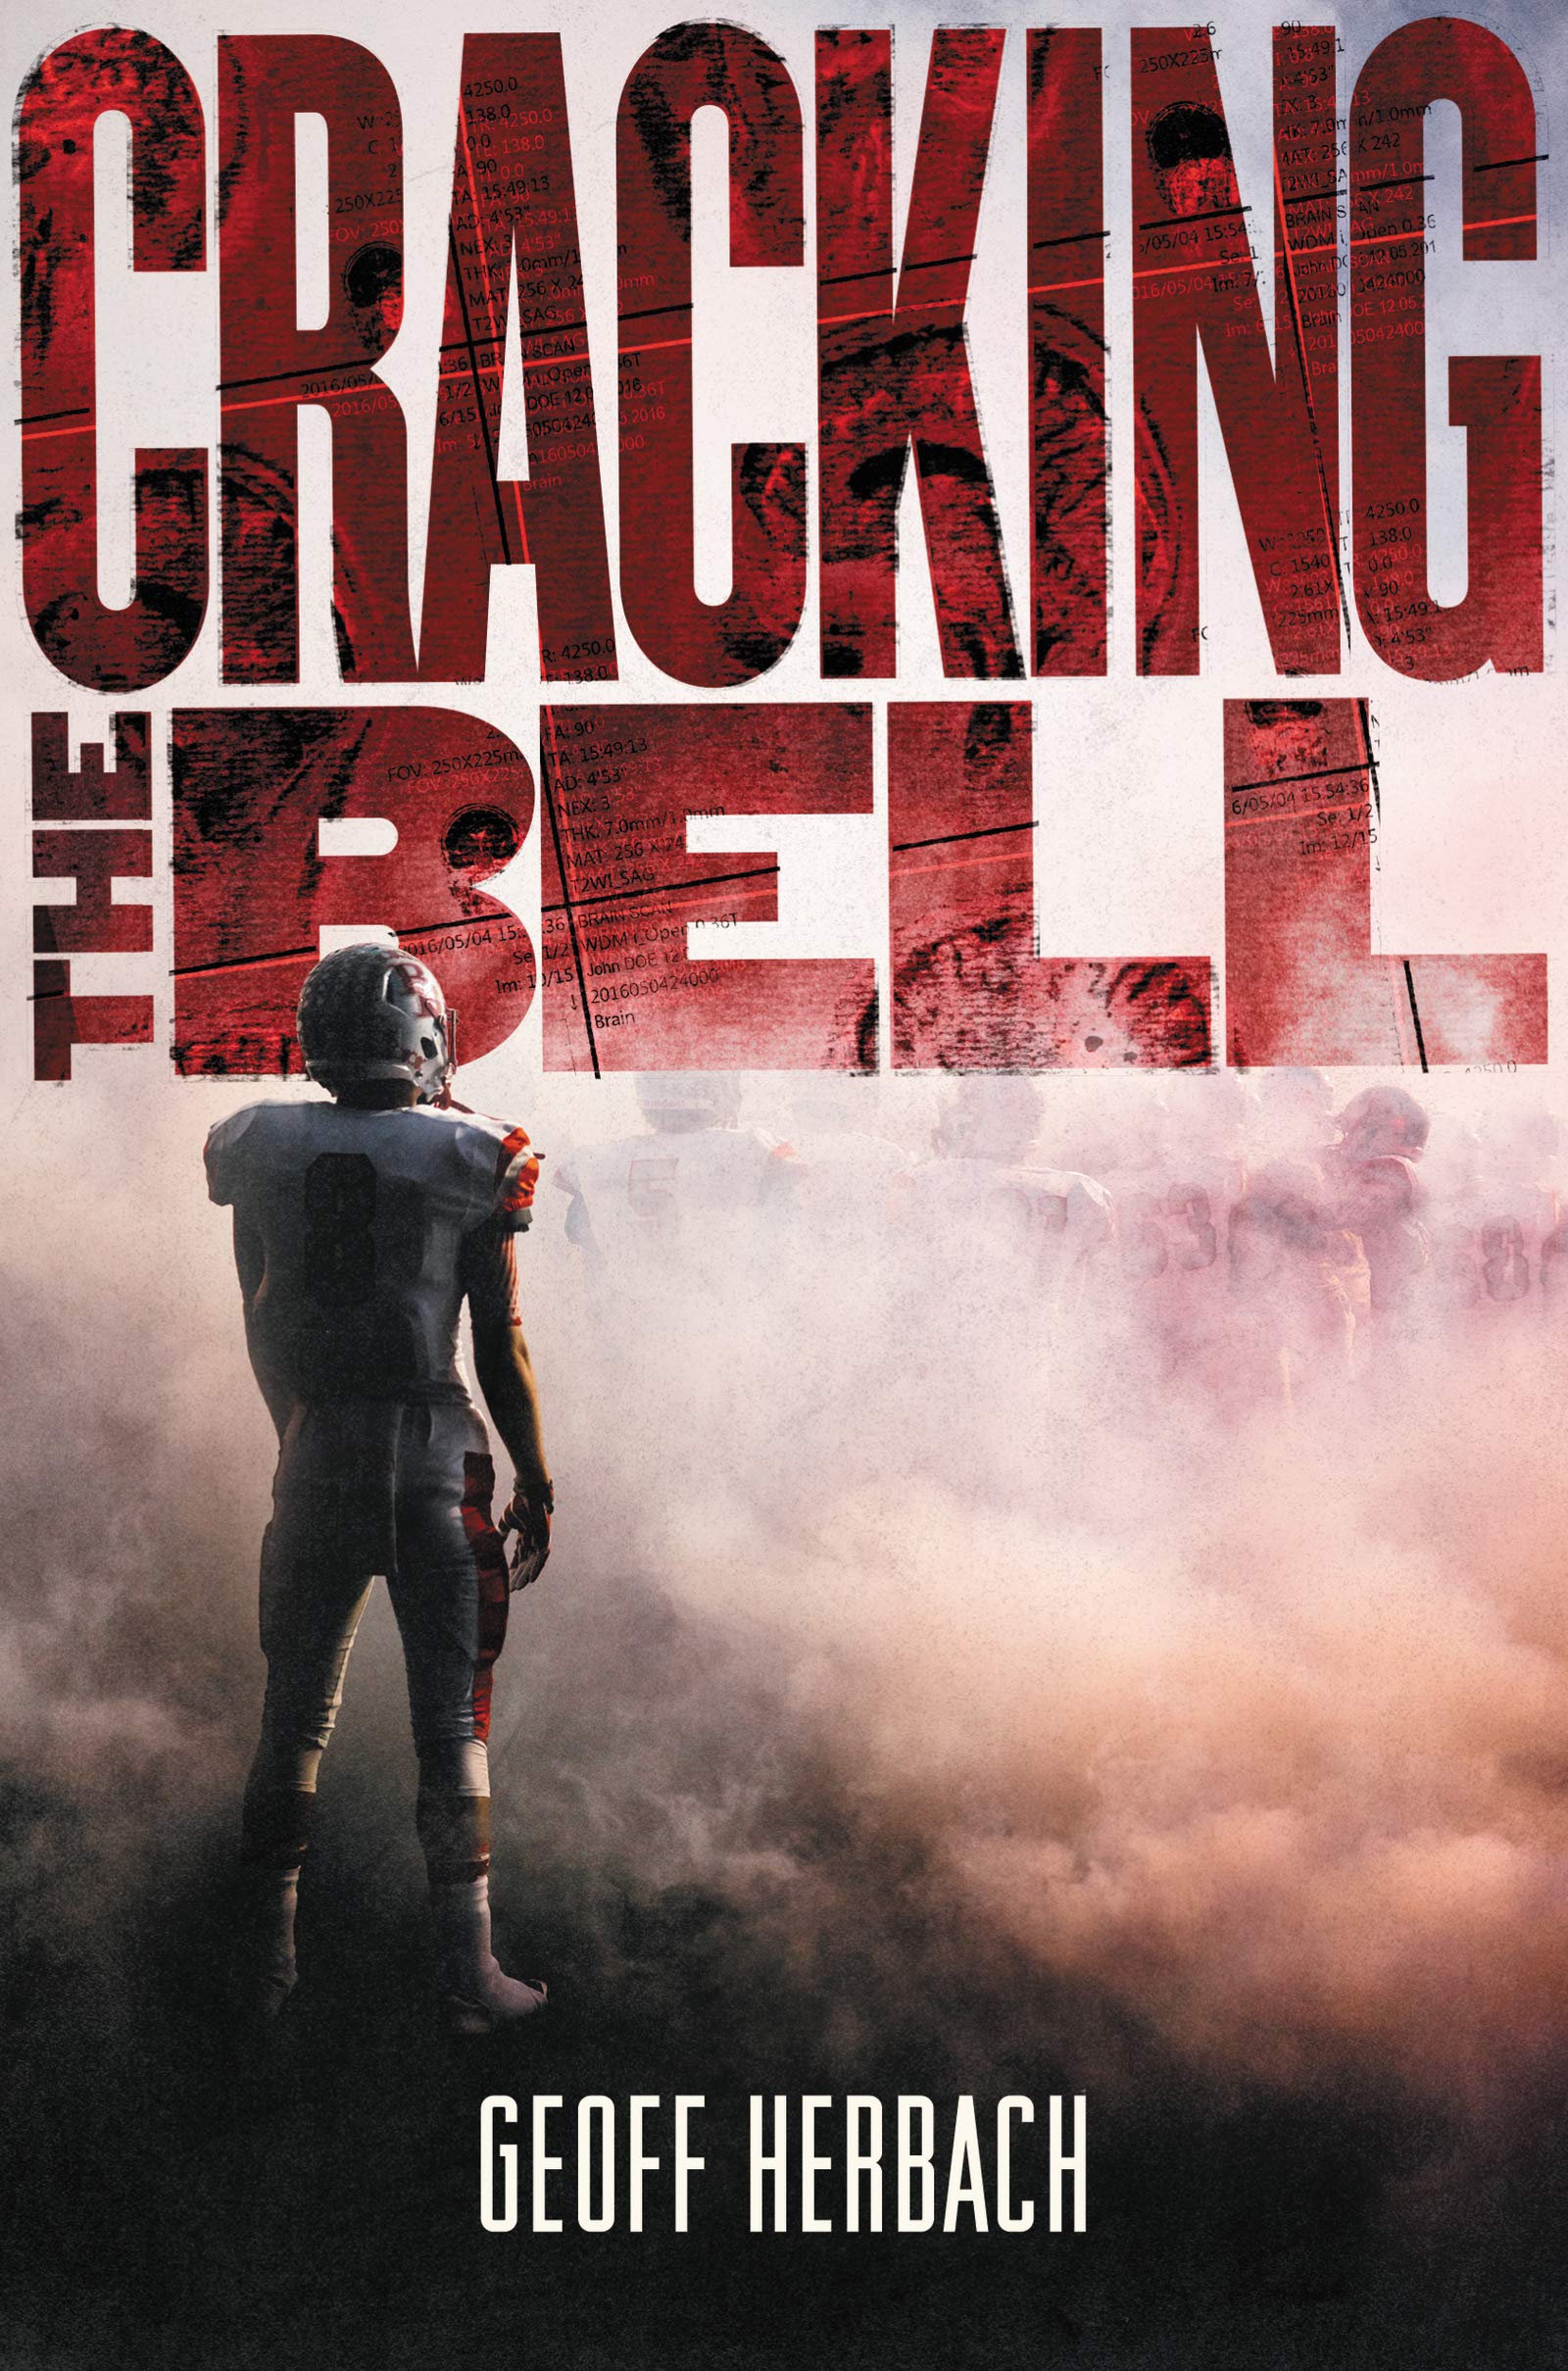 Photo of book cover for Cracking the Bell. Student dressed in football gear standing on football field.